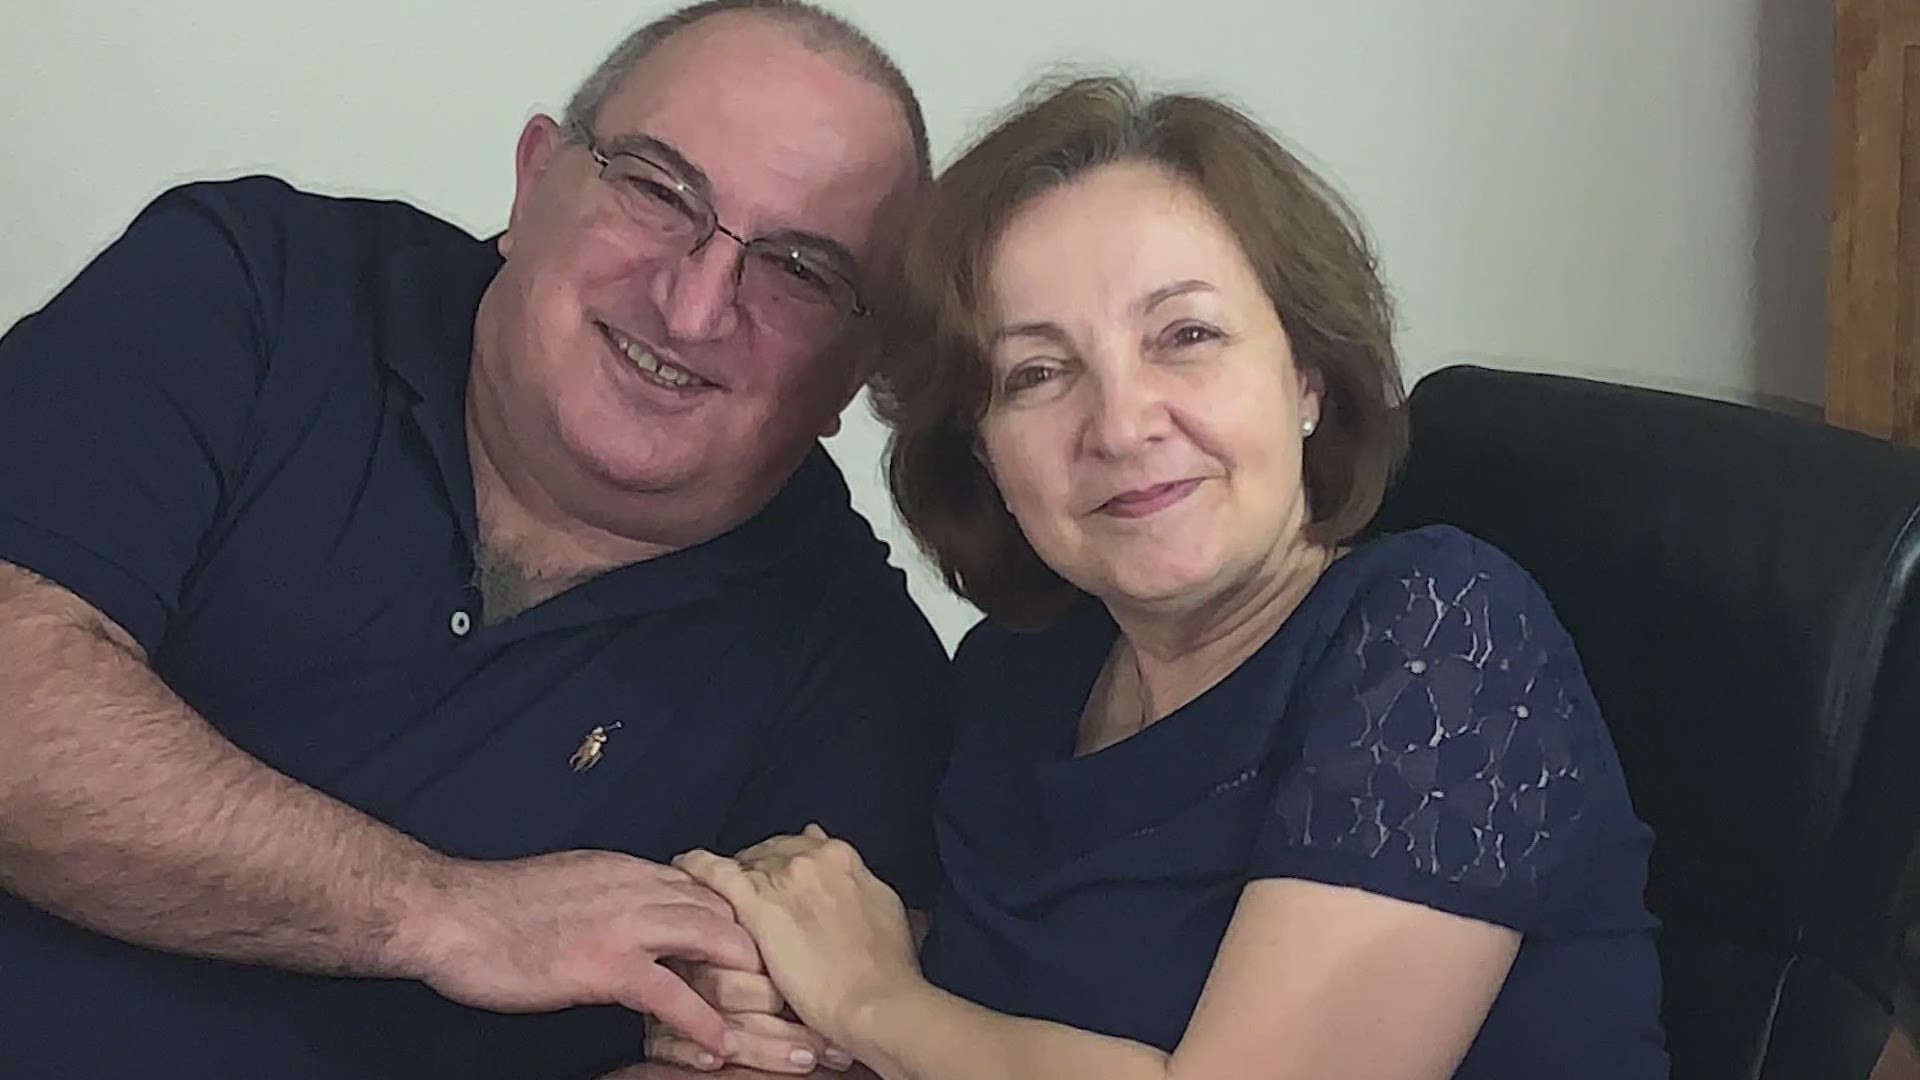 Carlos and Graciela Cirnigliaro traveled to Argentina to visit sick family members for 2 weeks, but now are unable to leave the country.